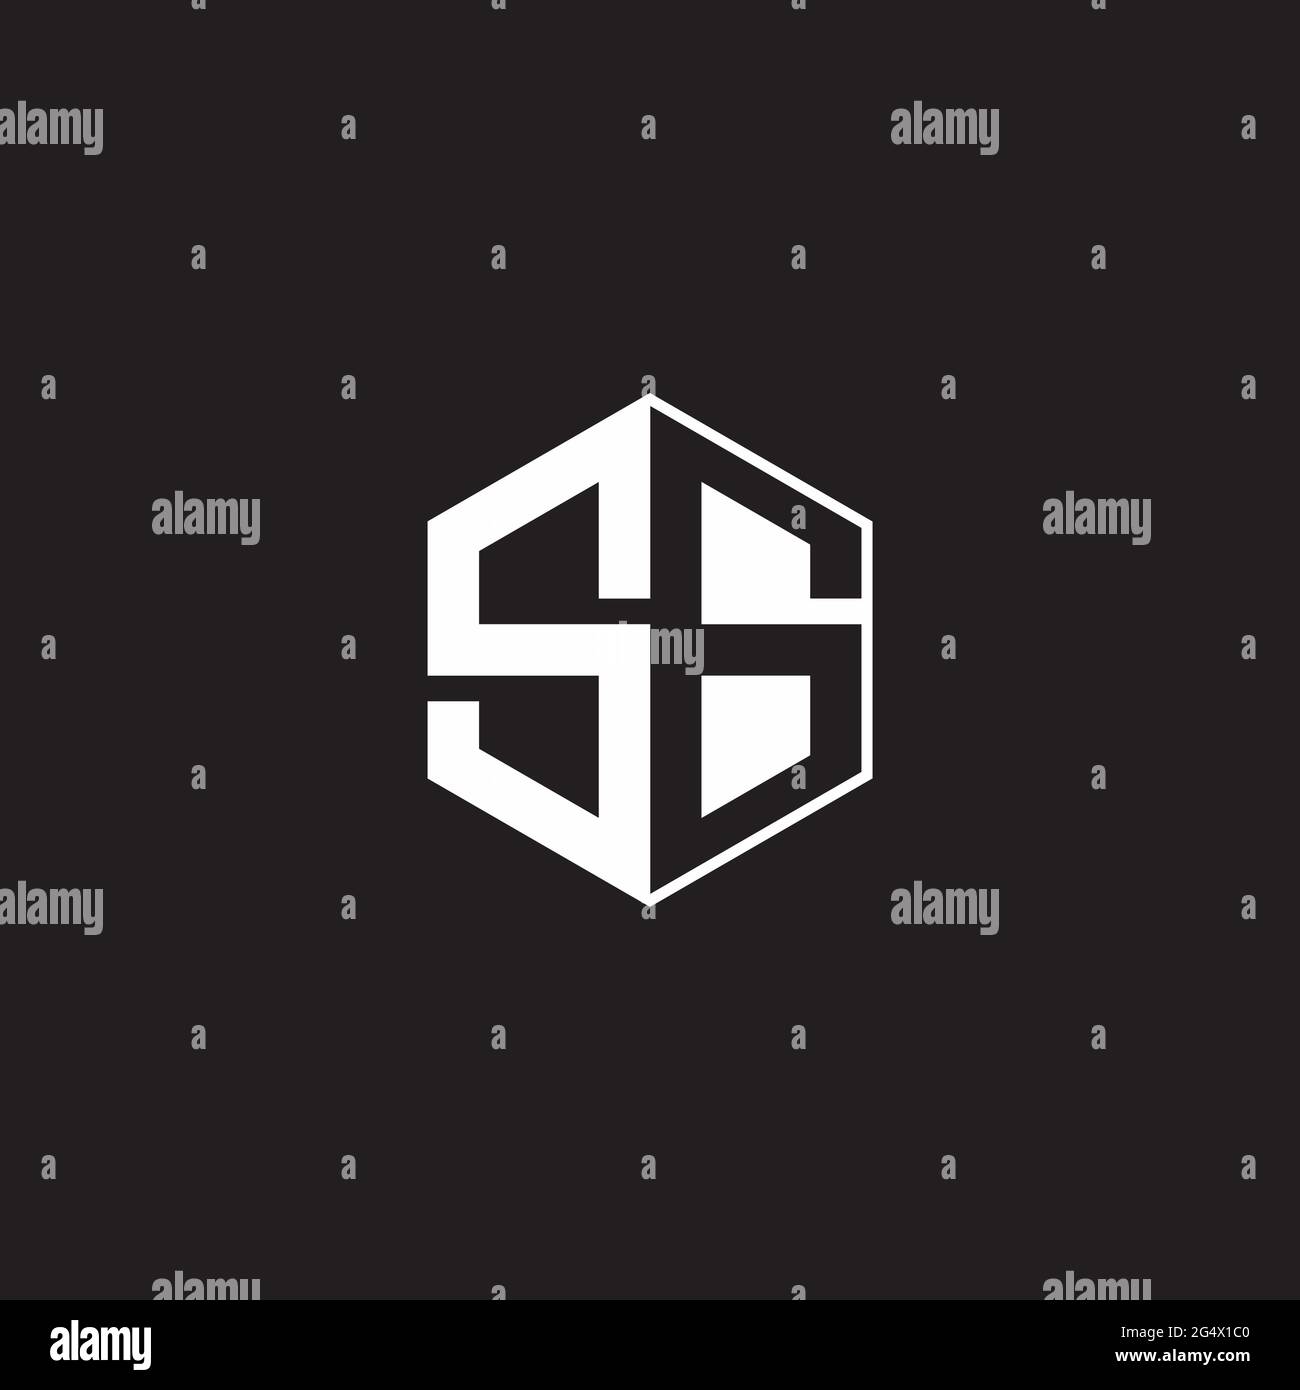 SG S G GS Logo monogram hexagon with black background negative space style Stock Vector